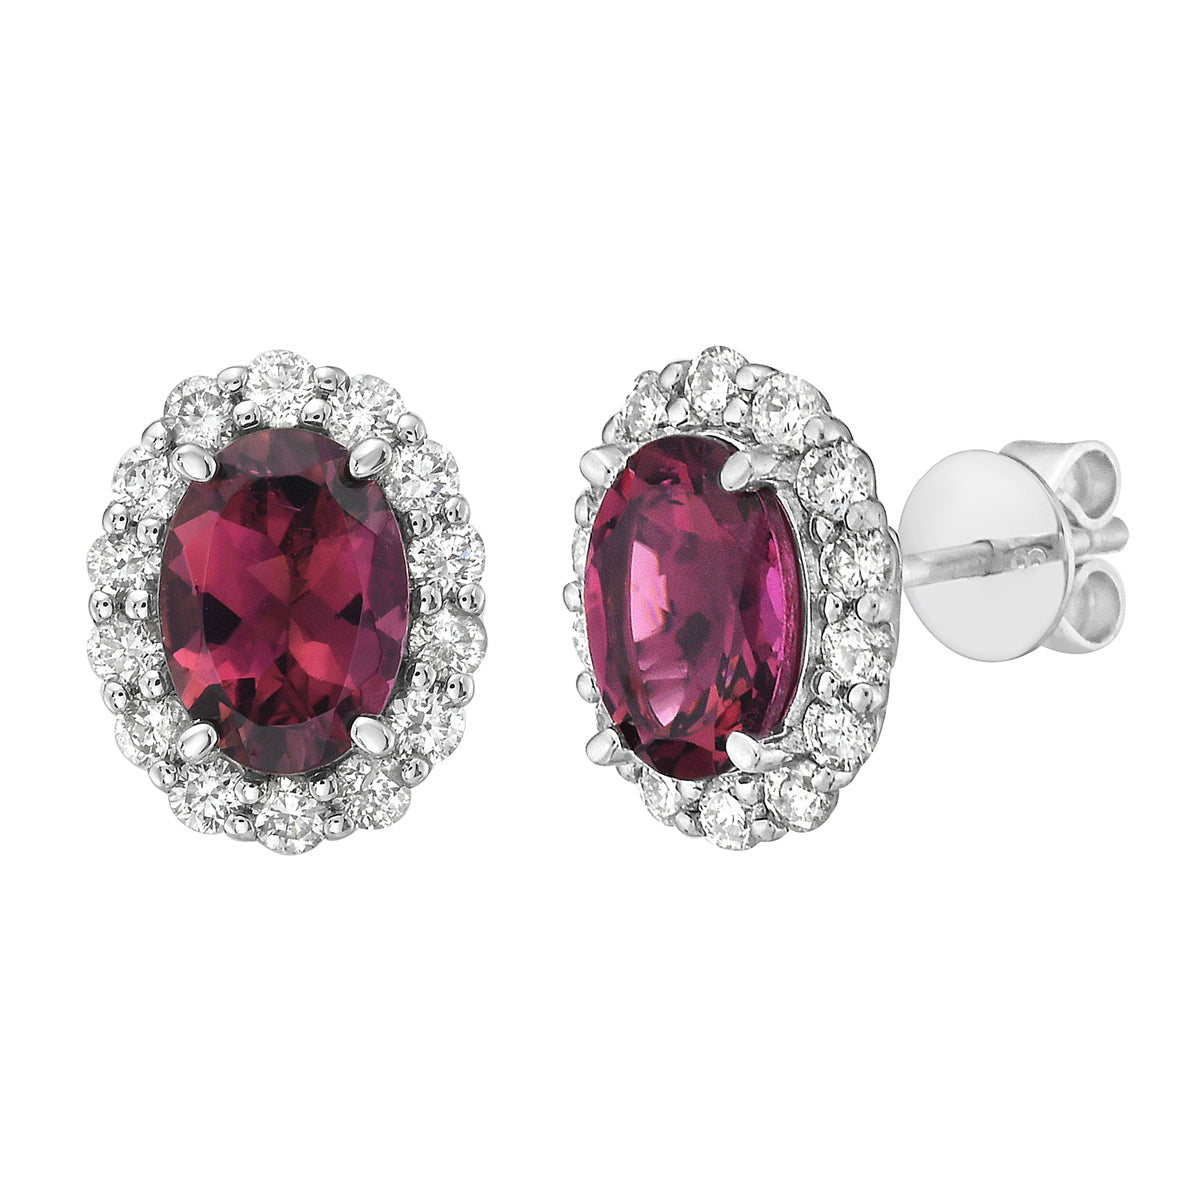 Earrings 14KW/1.7G 2PT-1.51CT 28RD-0.48CT Pink Tourmiline